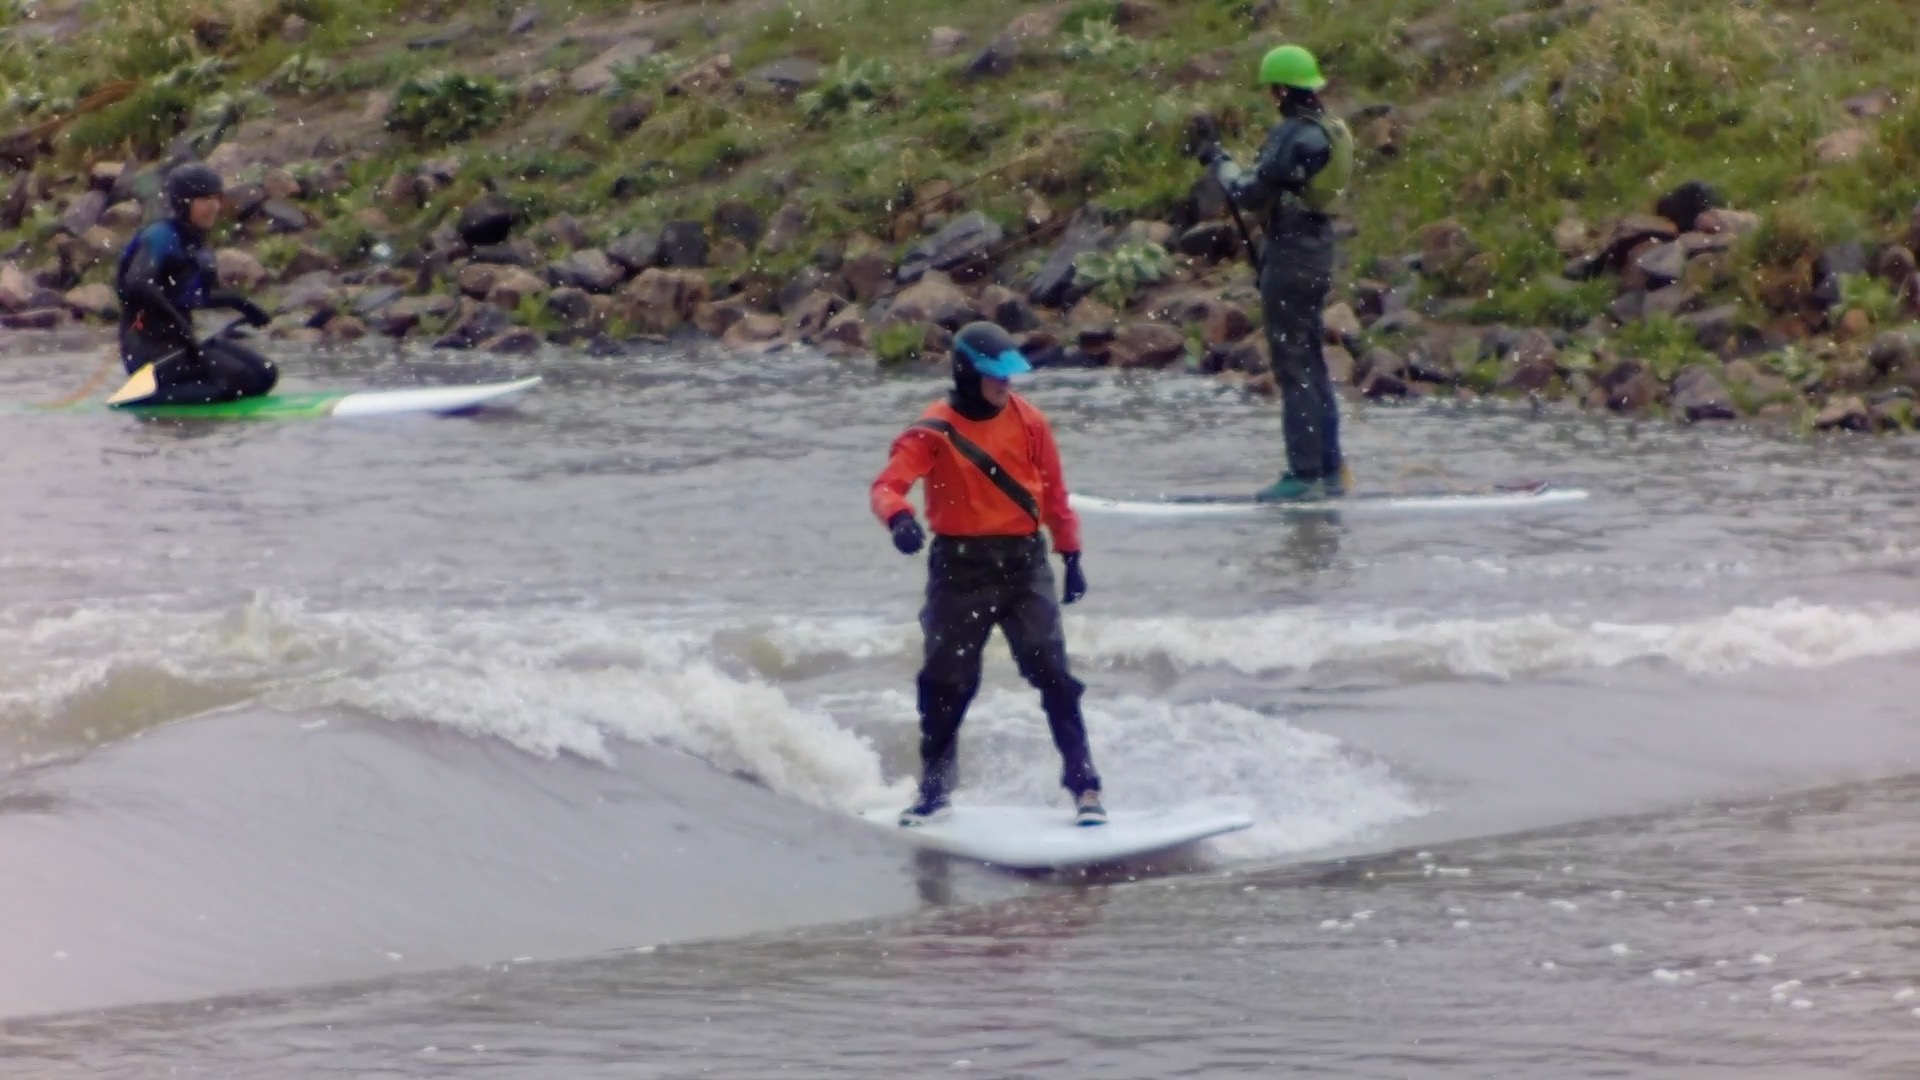 River Surfing, Miracle Wave, Denver